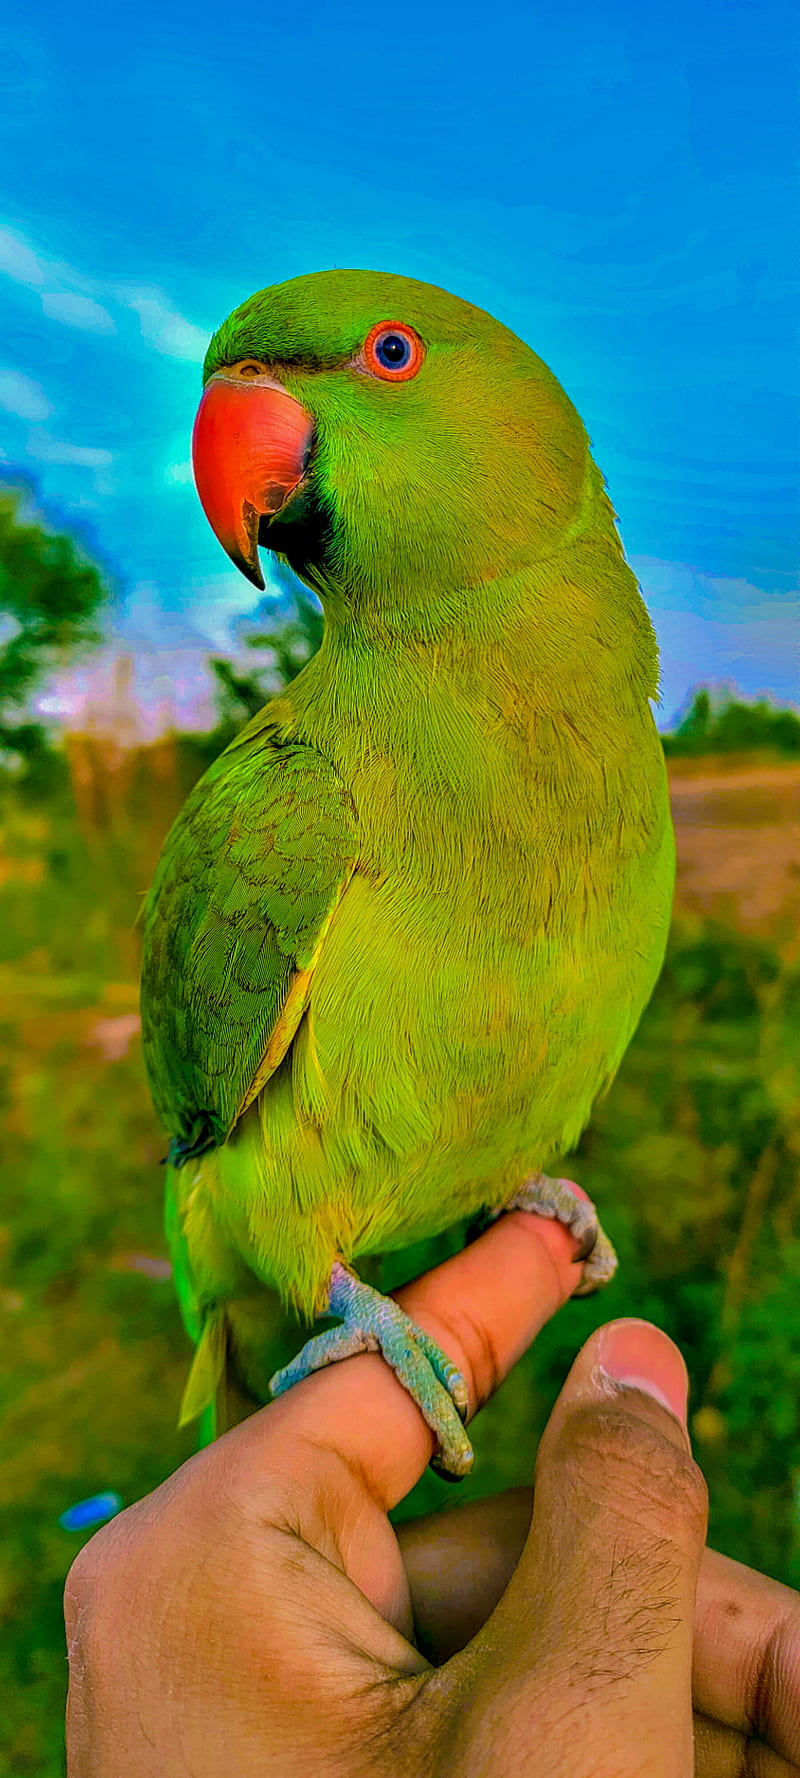 1080x1920 / 1080x1920 macaw, parrot, birds, hd, colorful for Iphone 6, 7, 8  wallpaper - Coolwallpapers.me!